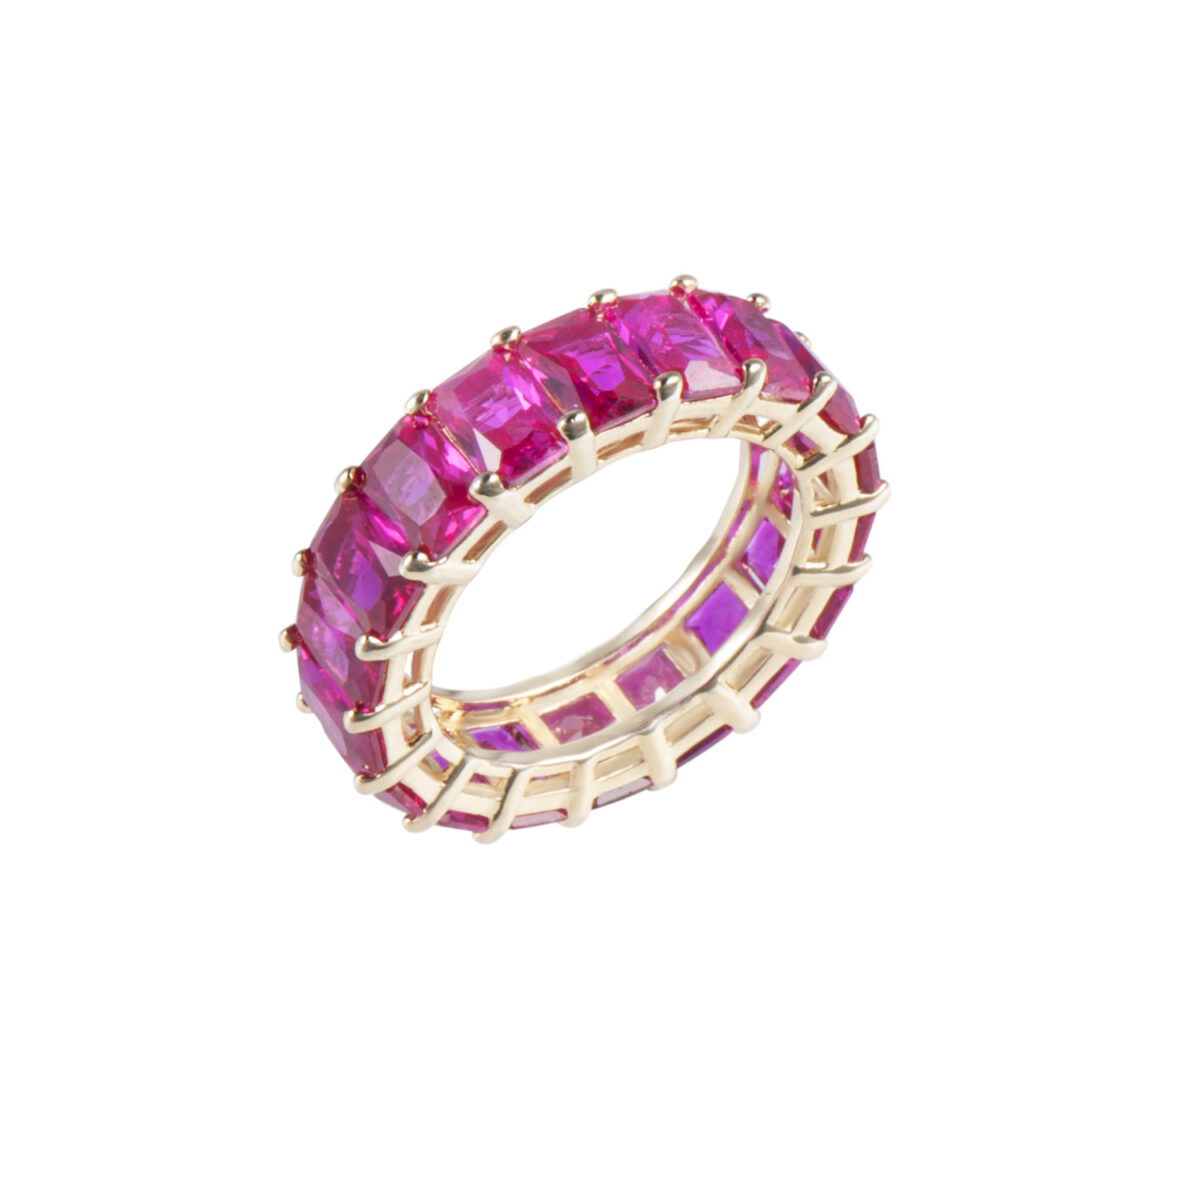 Spun Sugar Ring by CANDY ICE JEWELRY